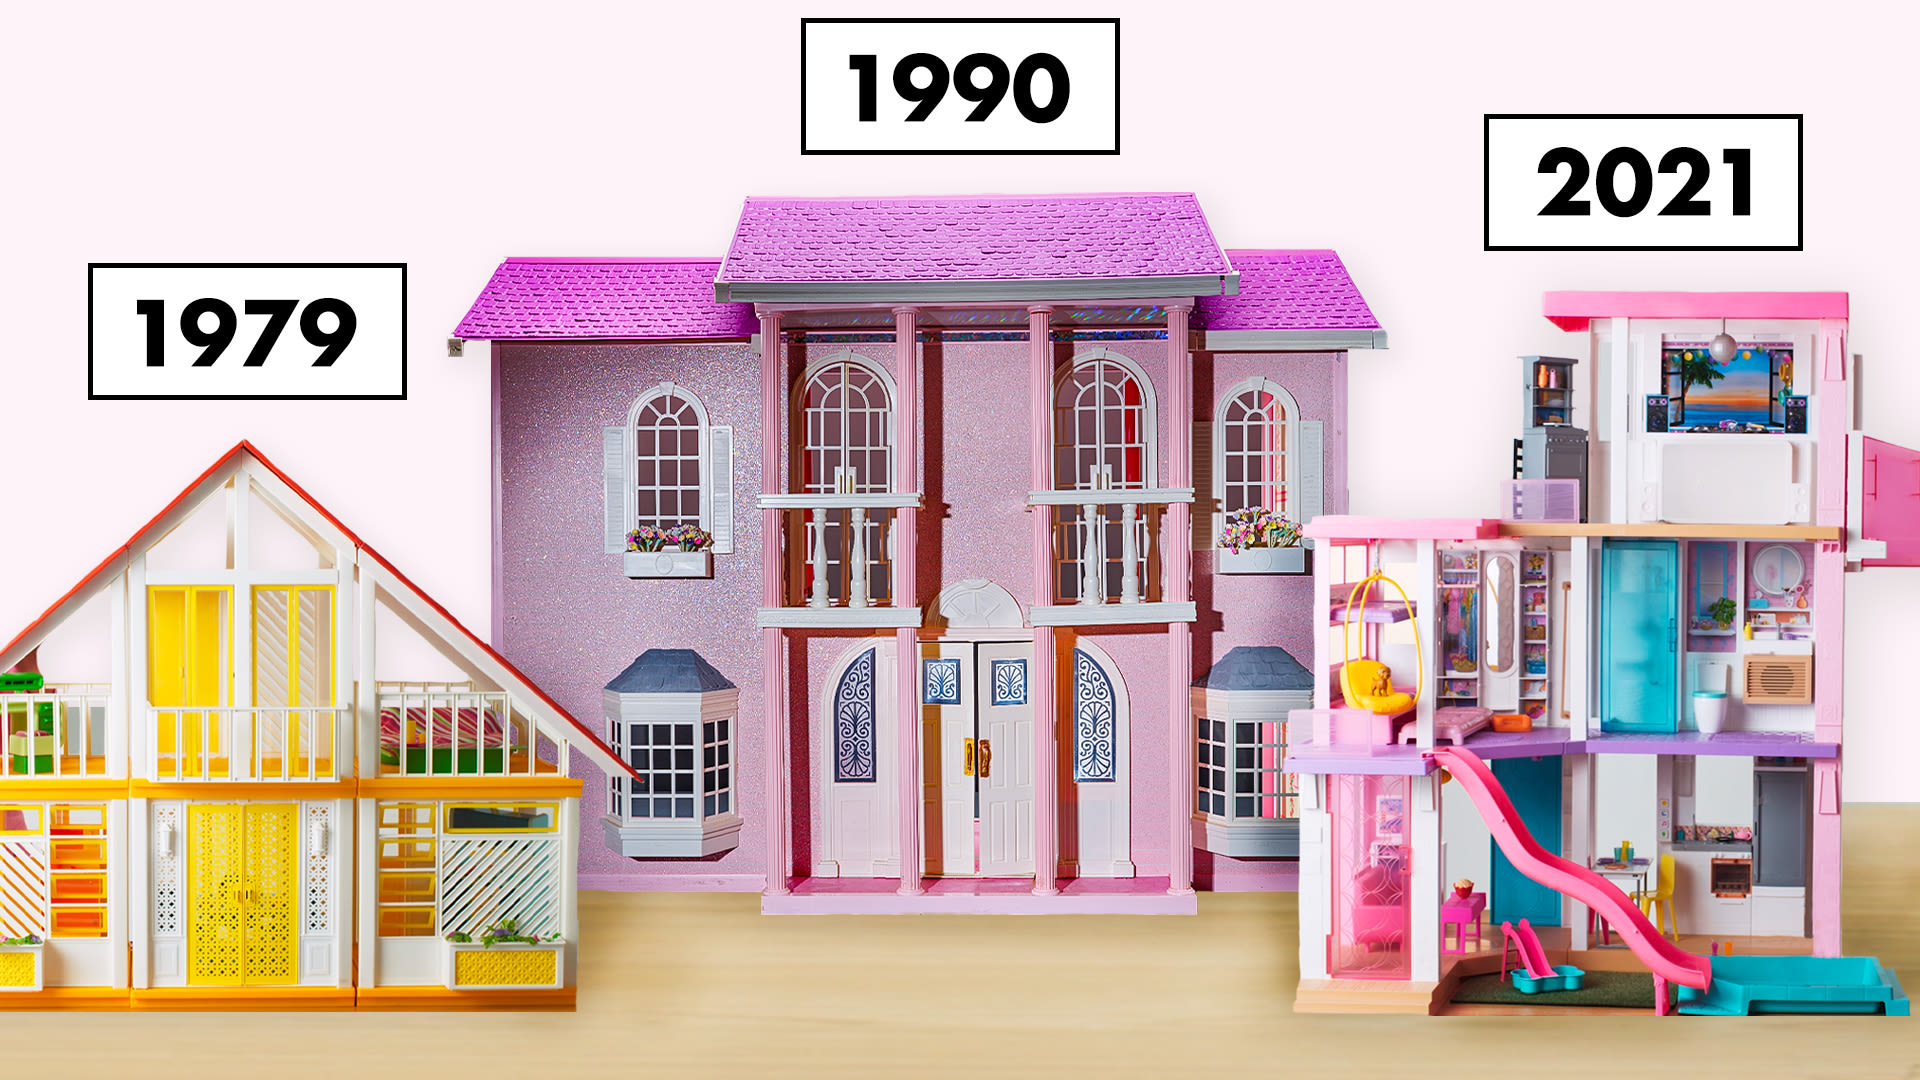 Traditional, authentic and quality dolls houses for sale